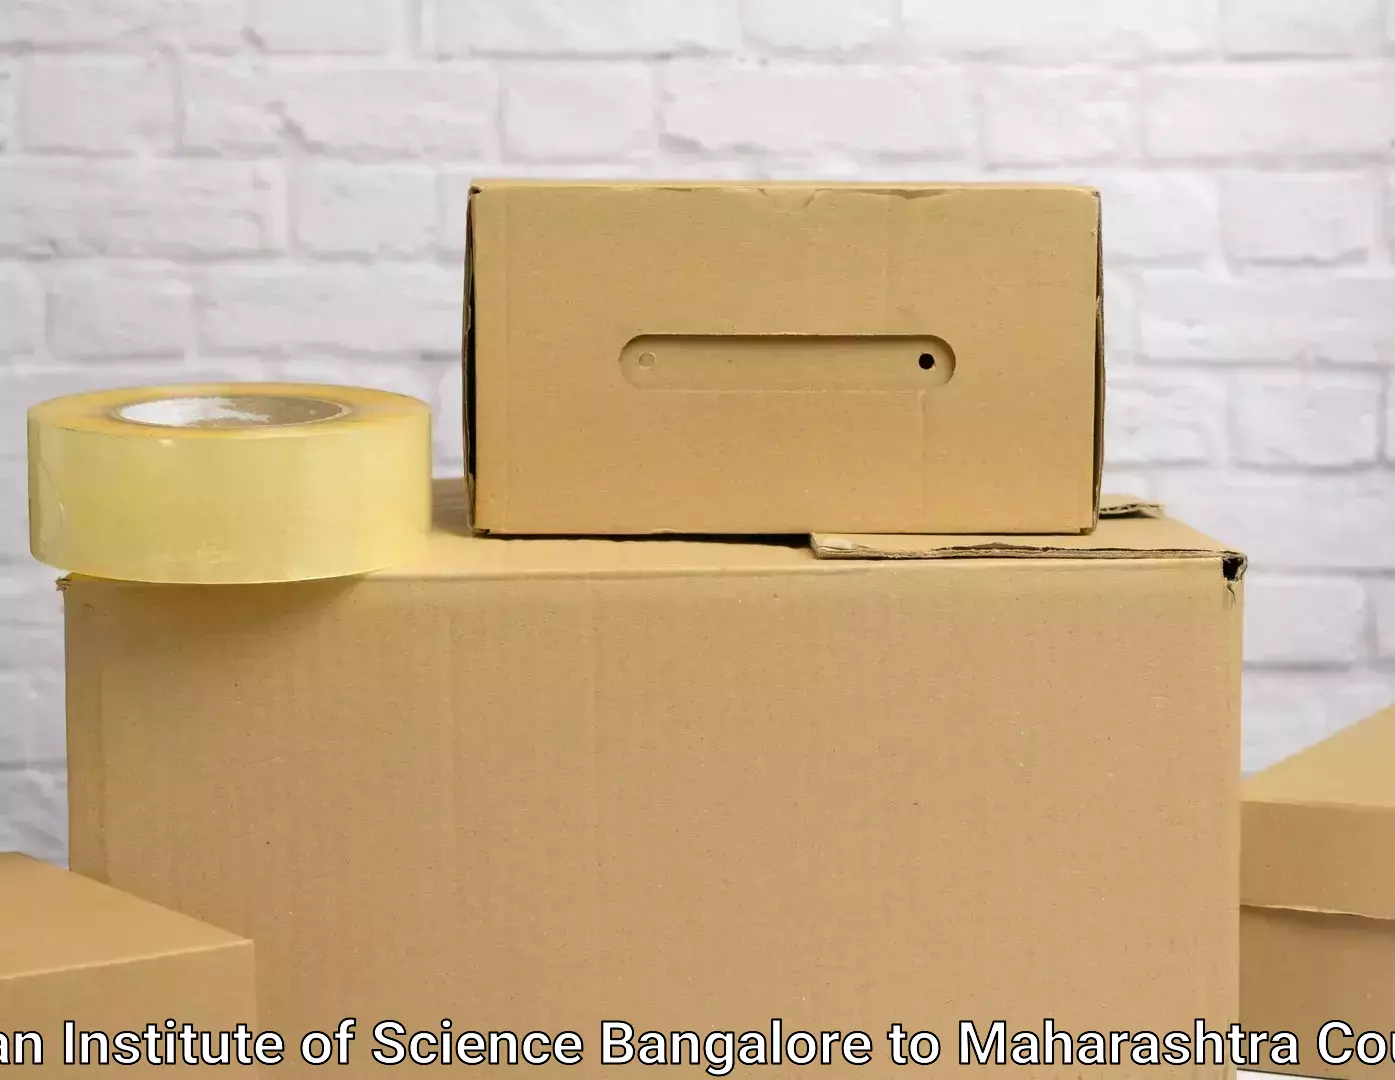 Residential moving experts Indian Institute of Science Bangalore to Hingoli